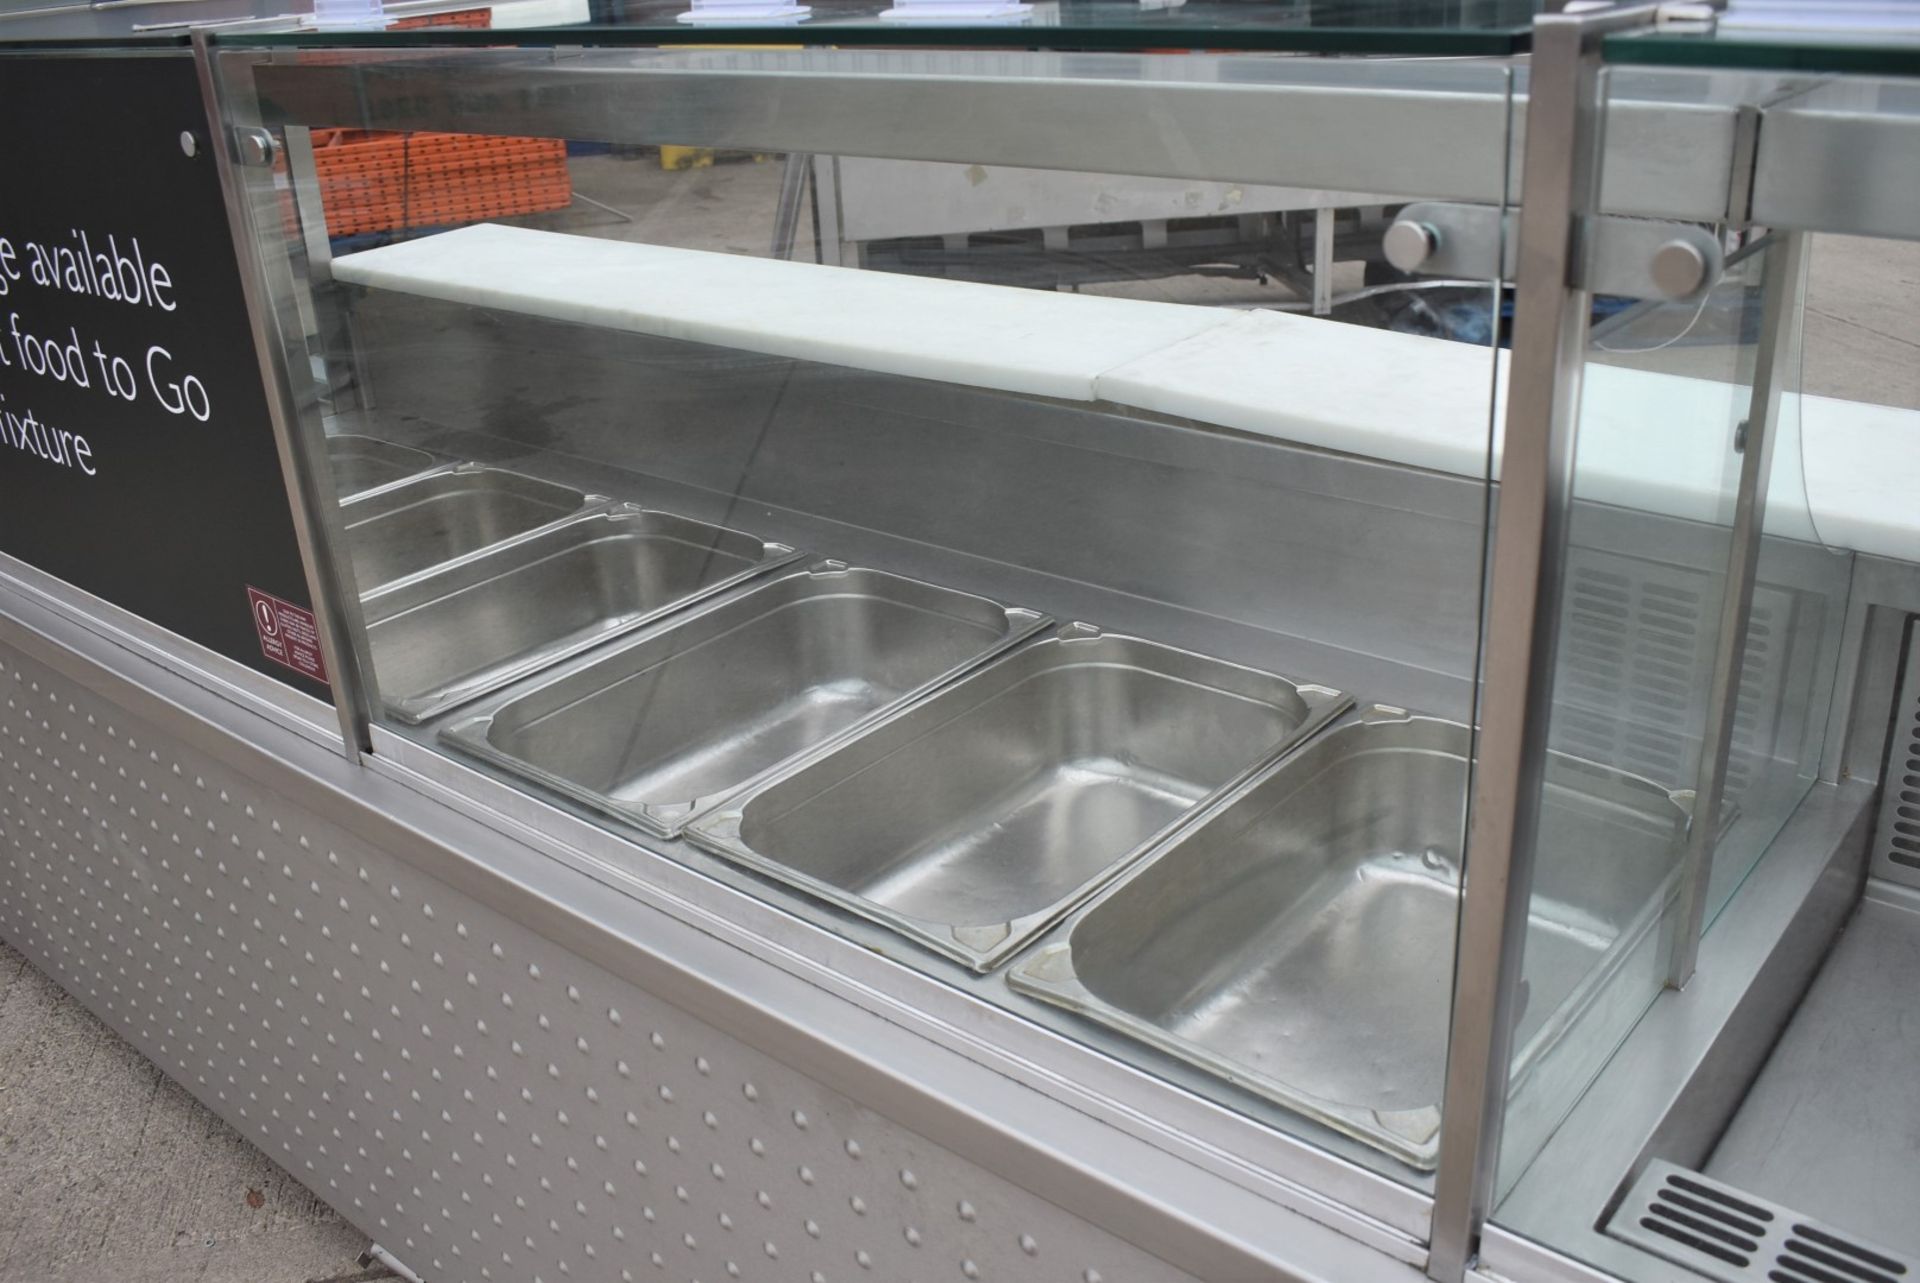 1 x Promart Heated Retail Counter For Take Aways, Hot Food Retail Stores or Canteens etc - - Image 28 of 54